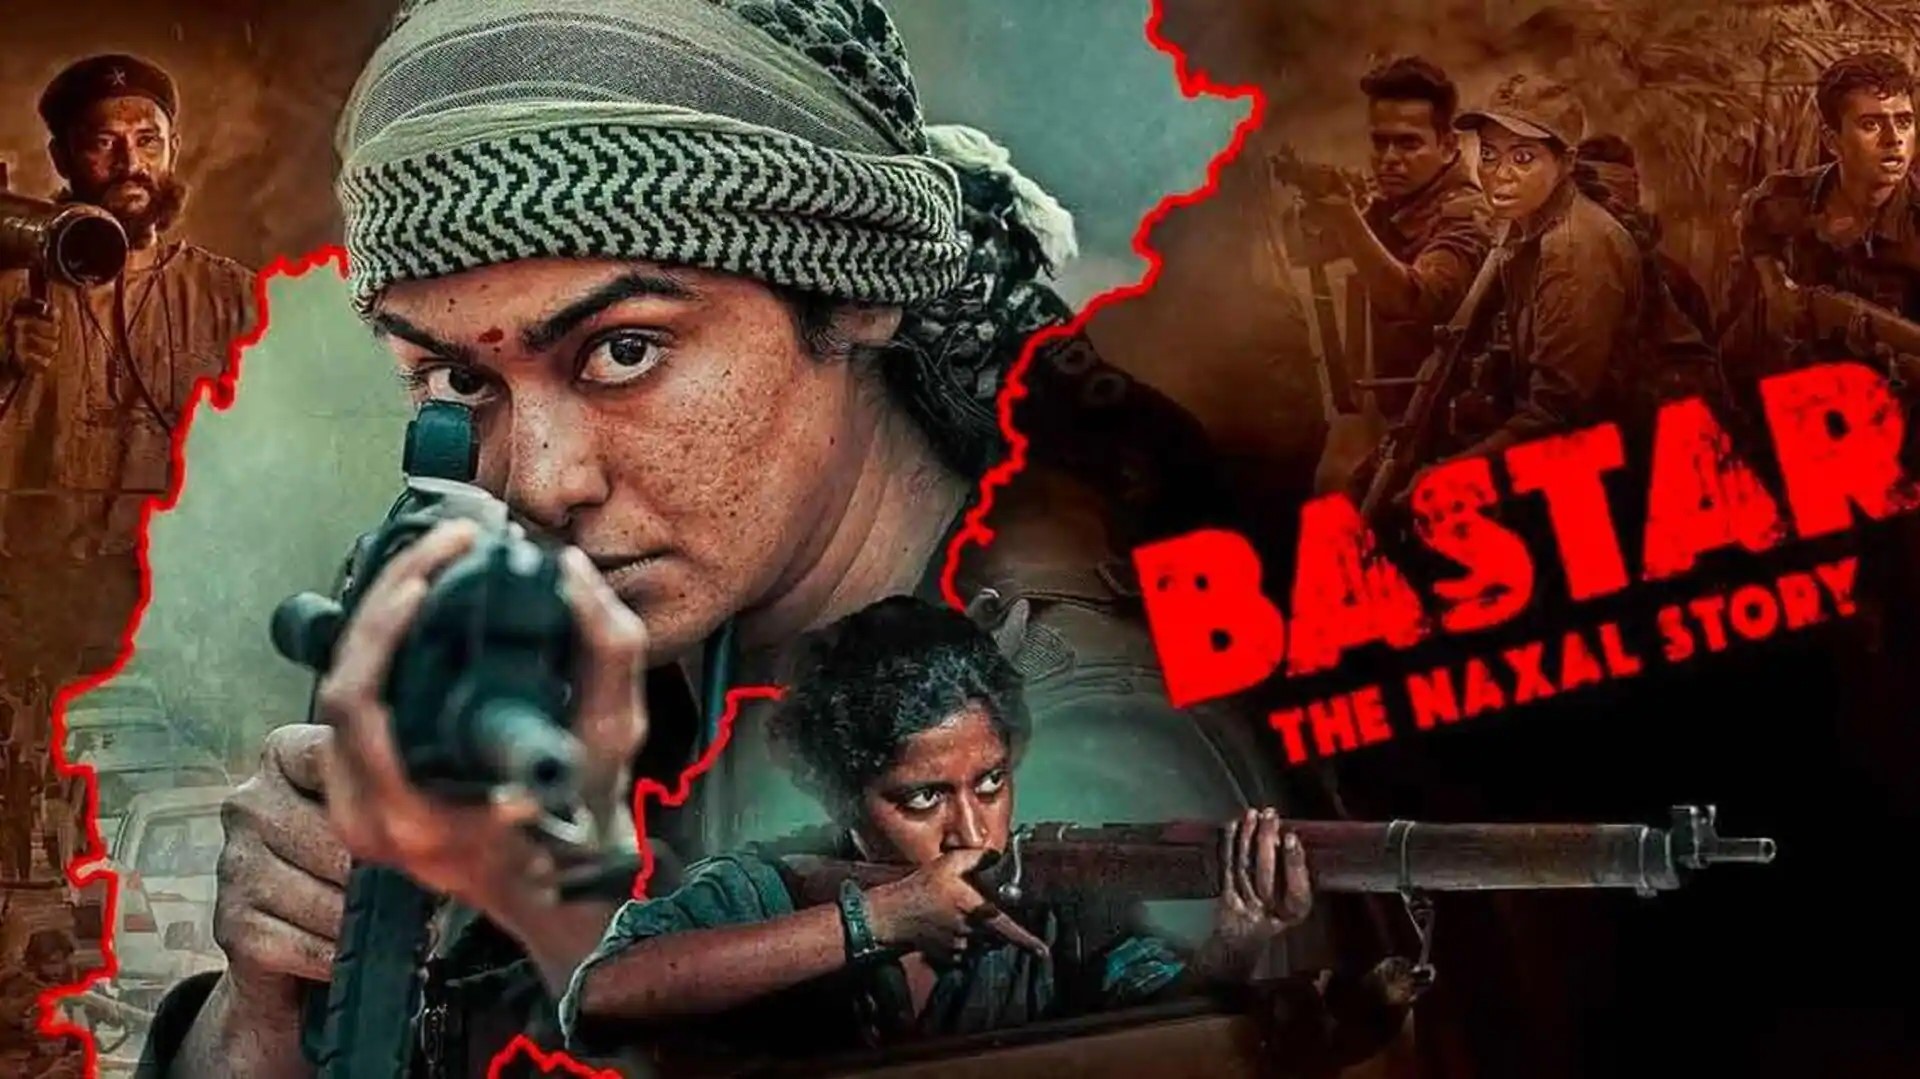 Bastar: The Naxal Story struggles at box office, earns ₹2 crore in first weekend